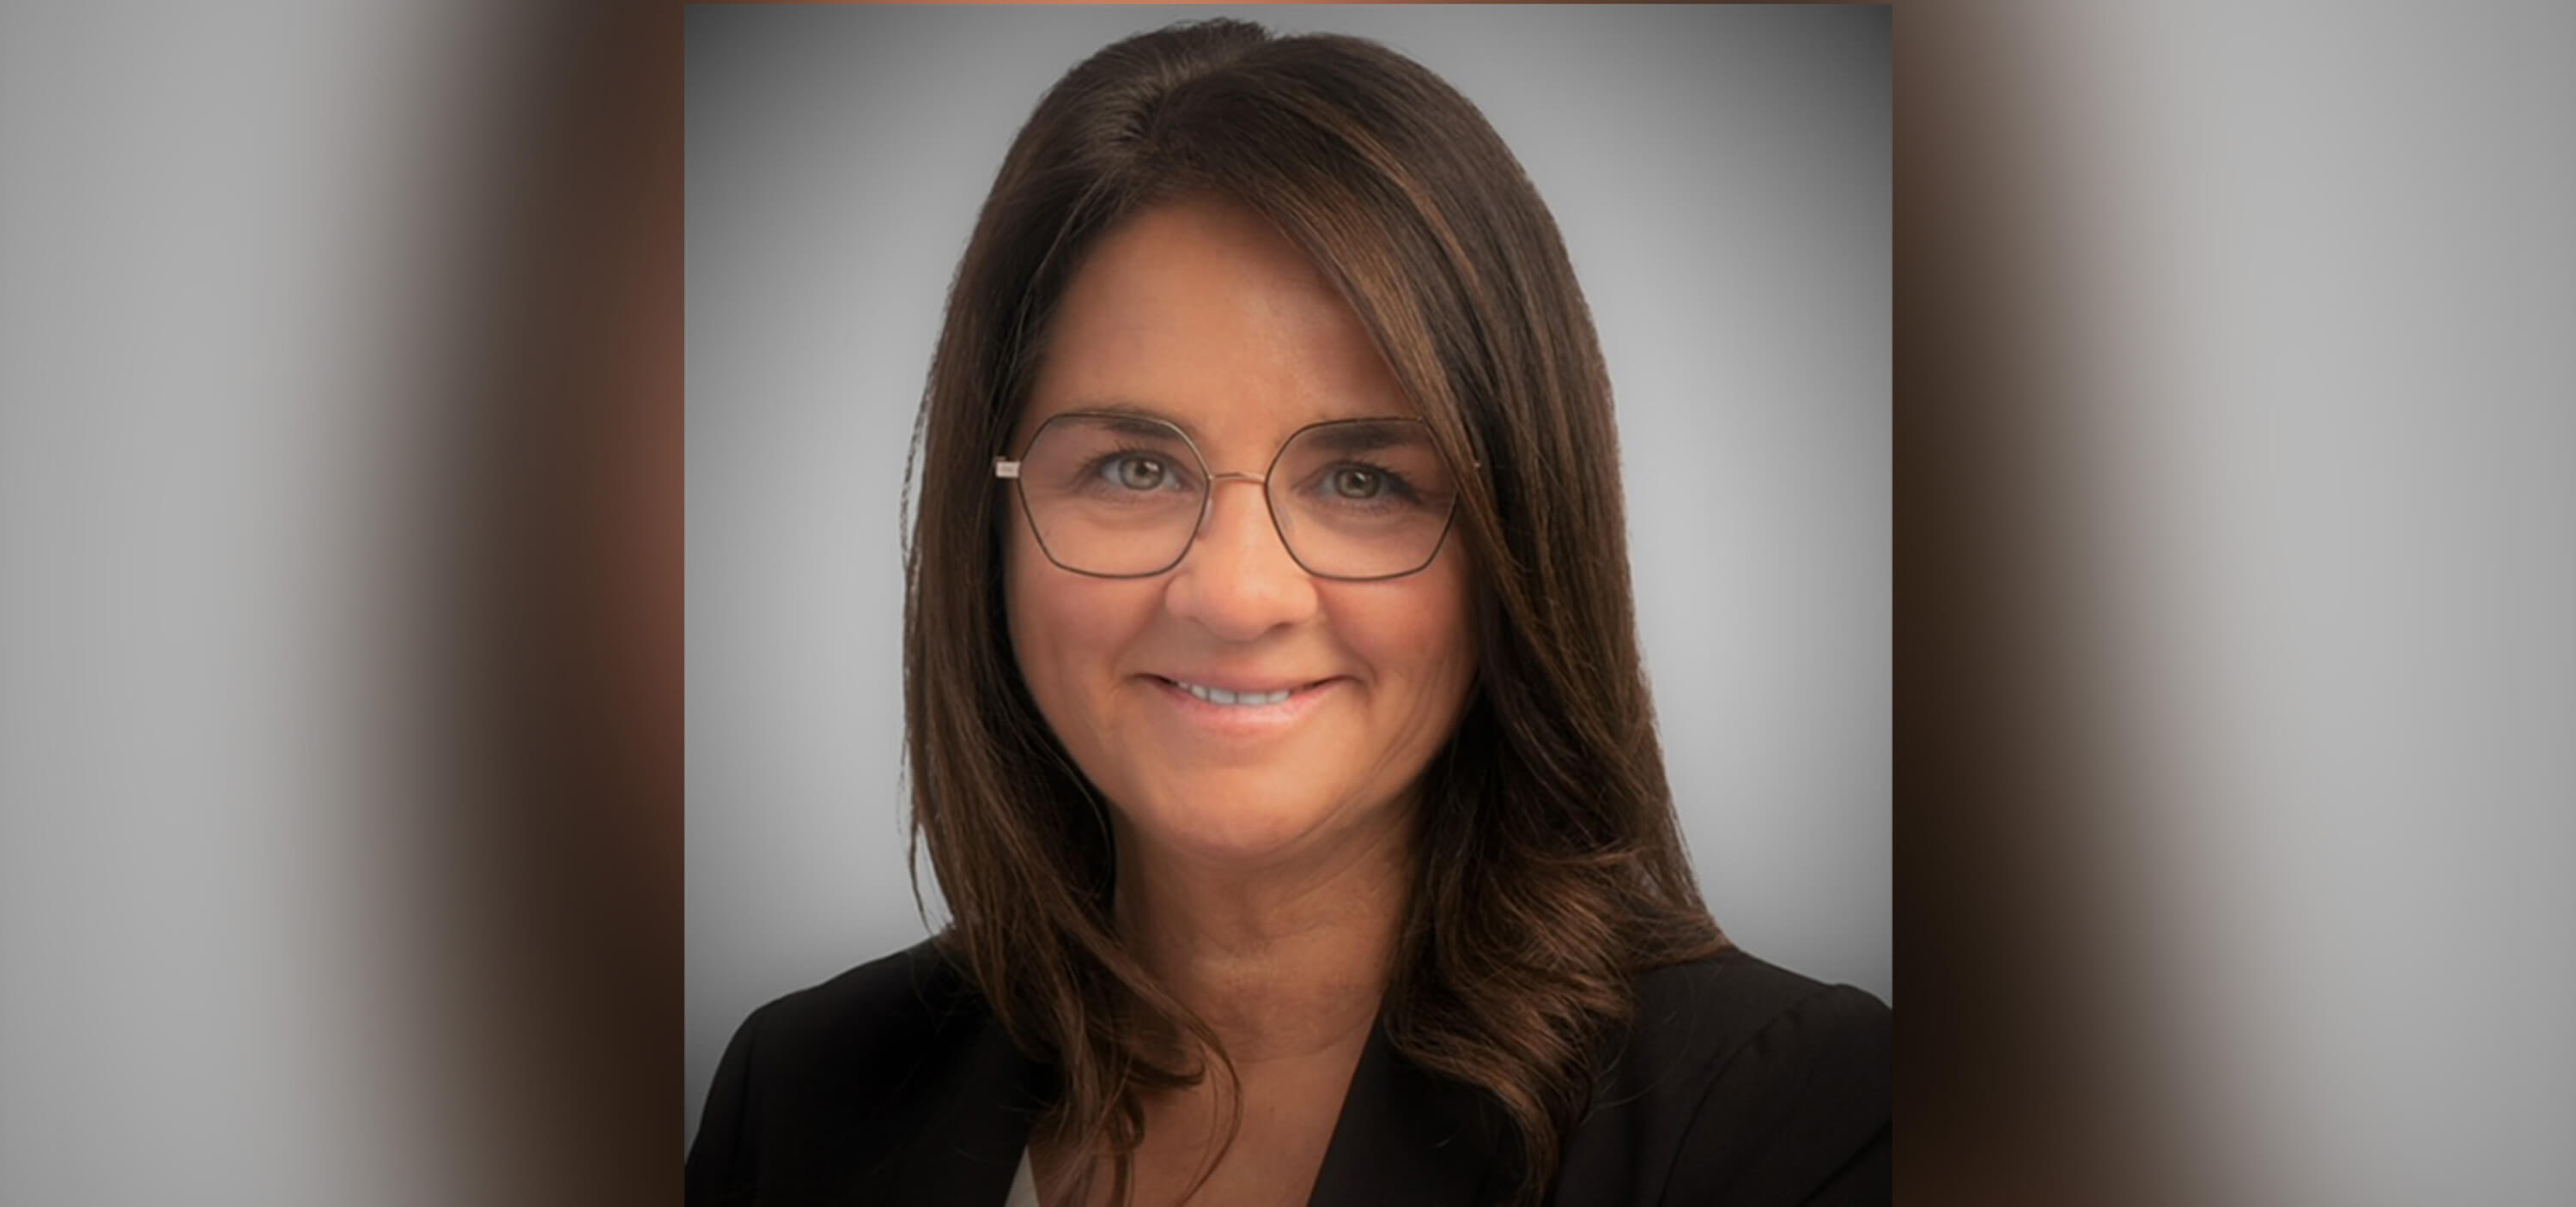 Female wearing glasses and a black blazer over a white shirt poses and smiles for a headshot.